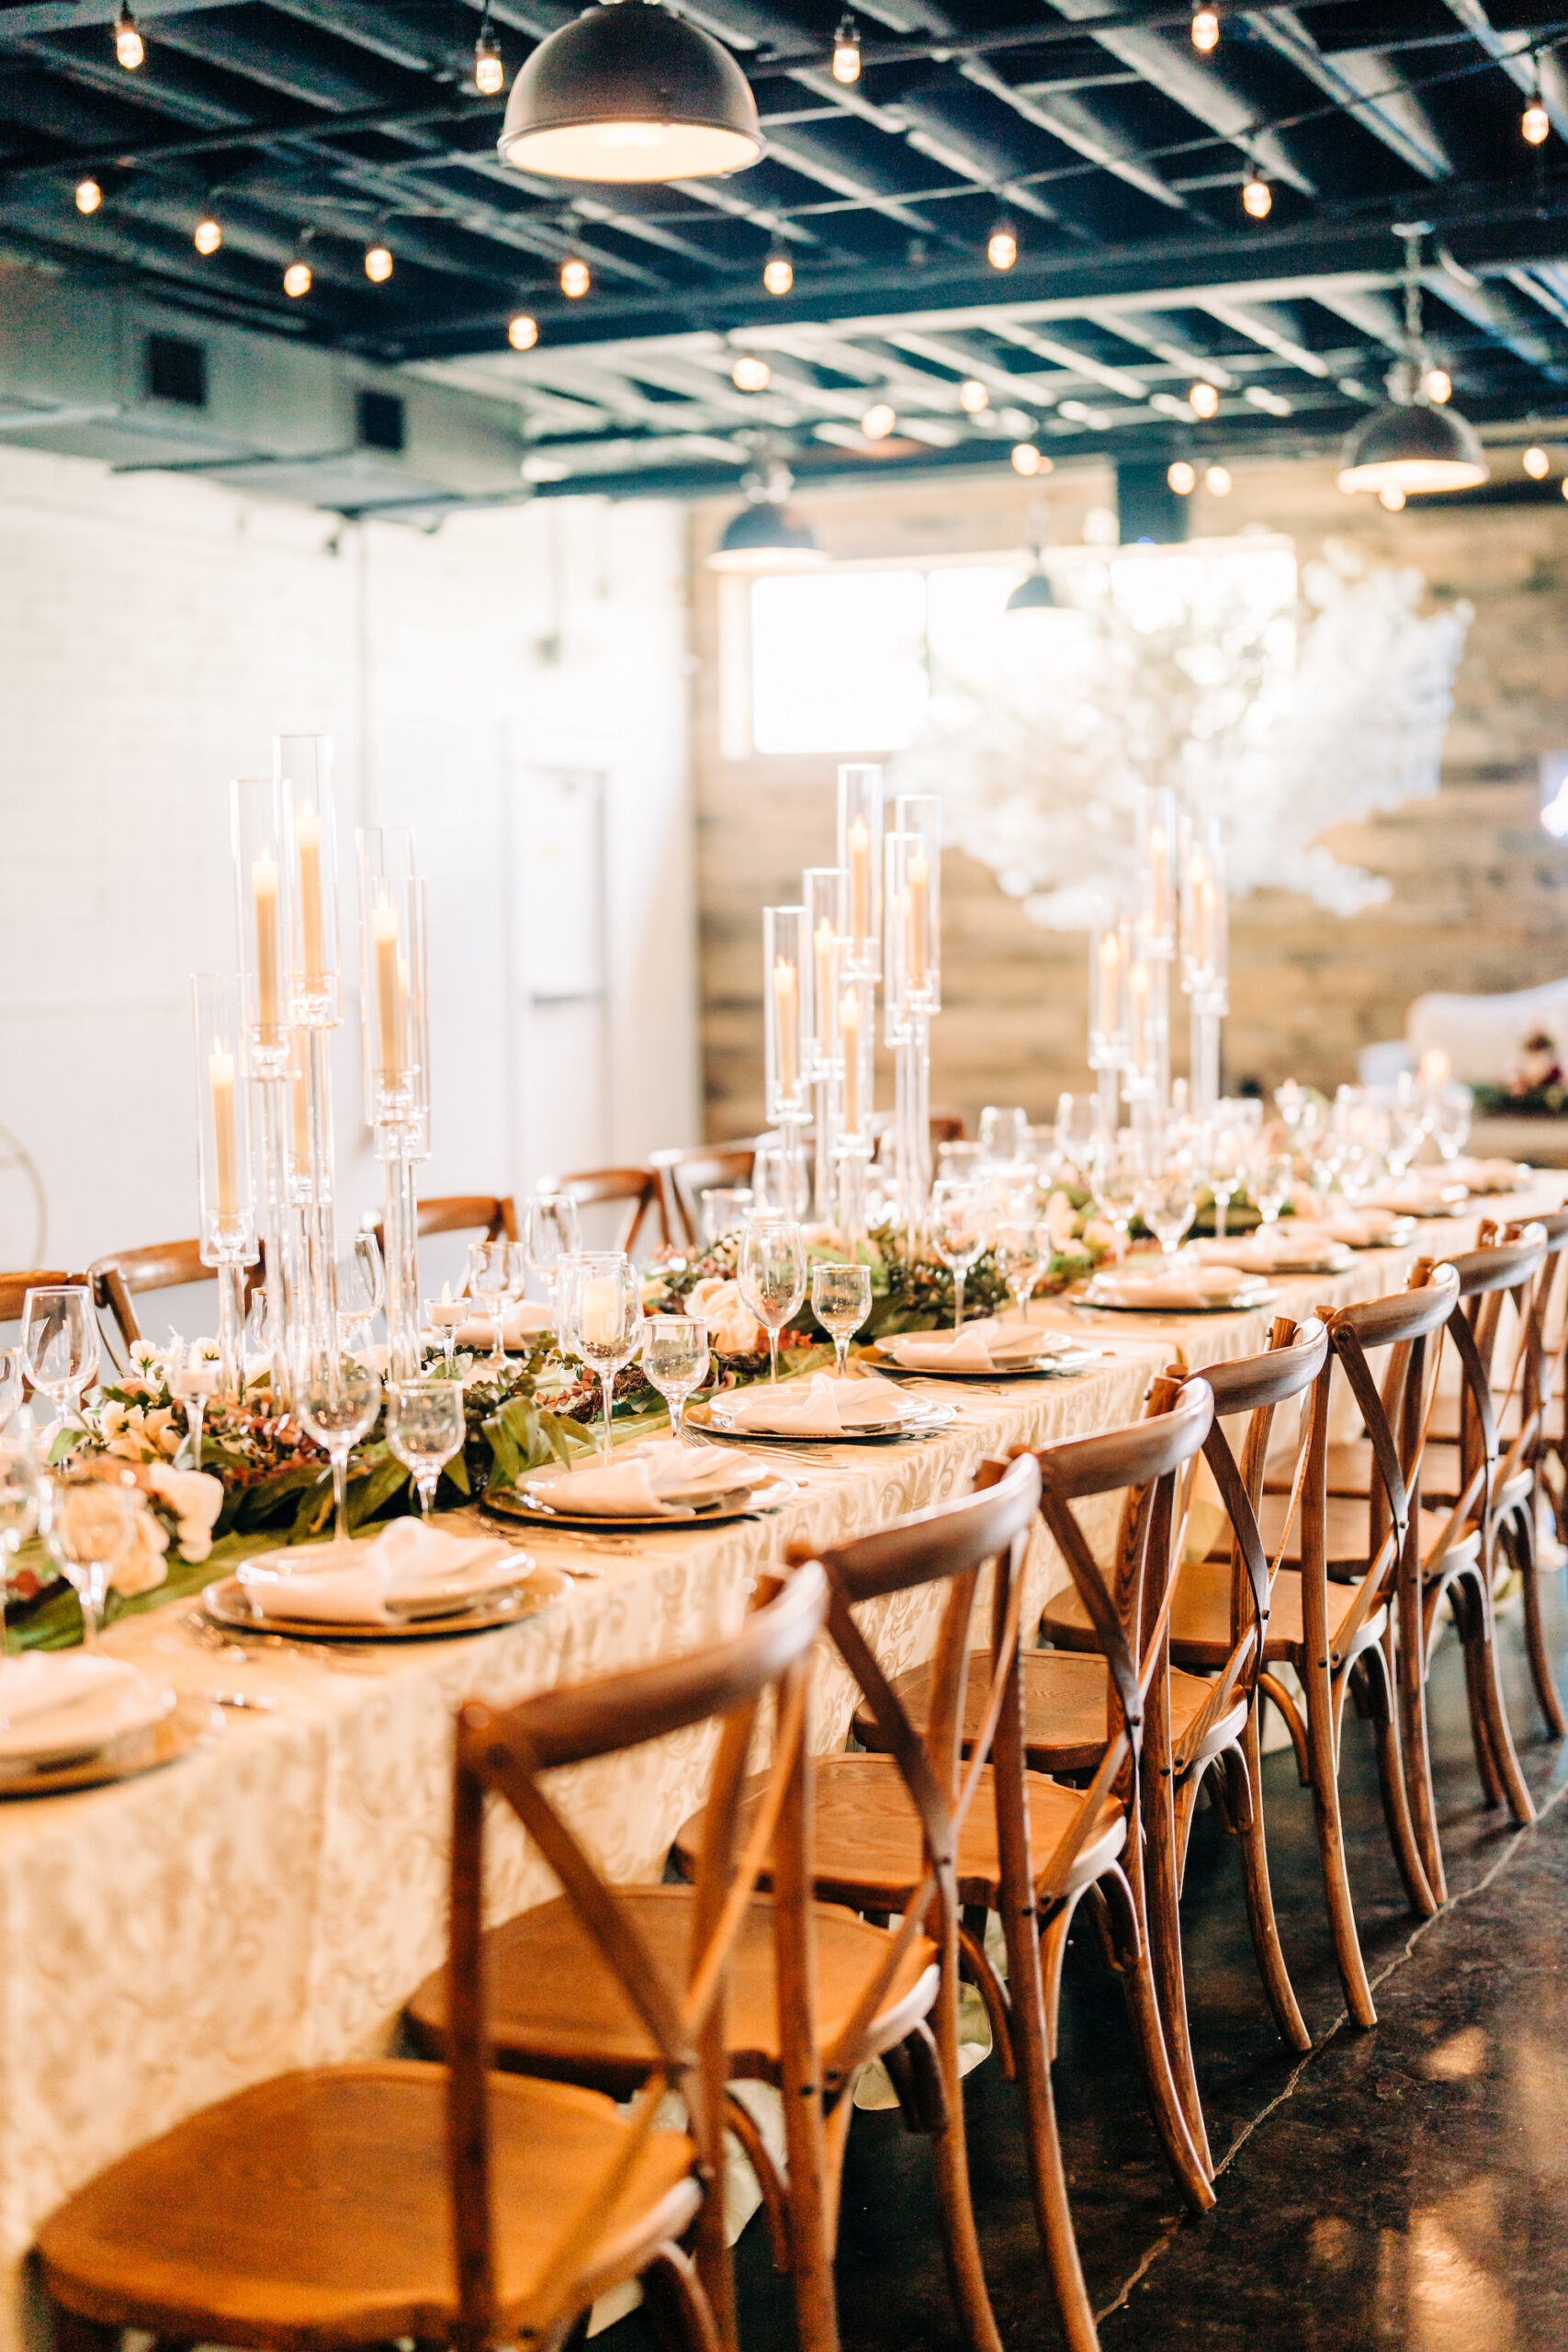 Elegant Wedding Spring Neutral Reception Decor Centerpiece Ideas | Long Feasting Tables with Glass Candelabra Centerpieces | Tampa Bay Rental Elite Events Catering | Venue The West Events